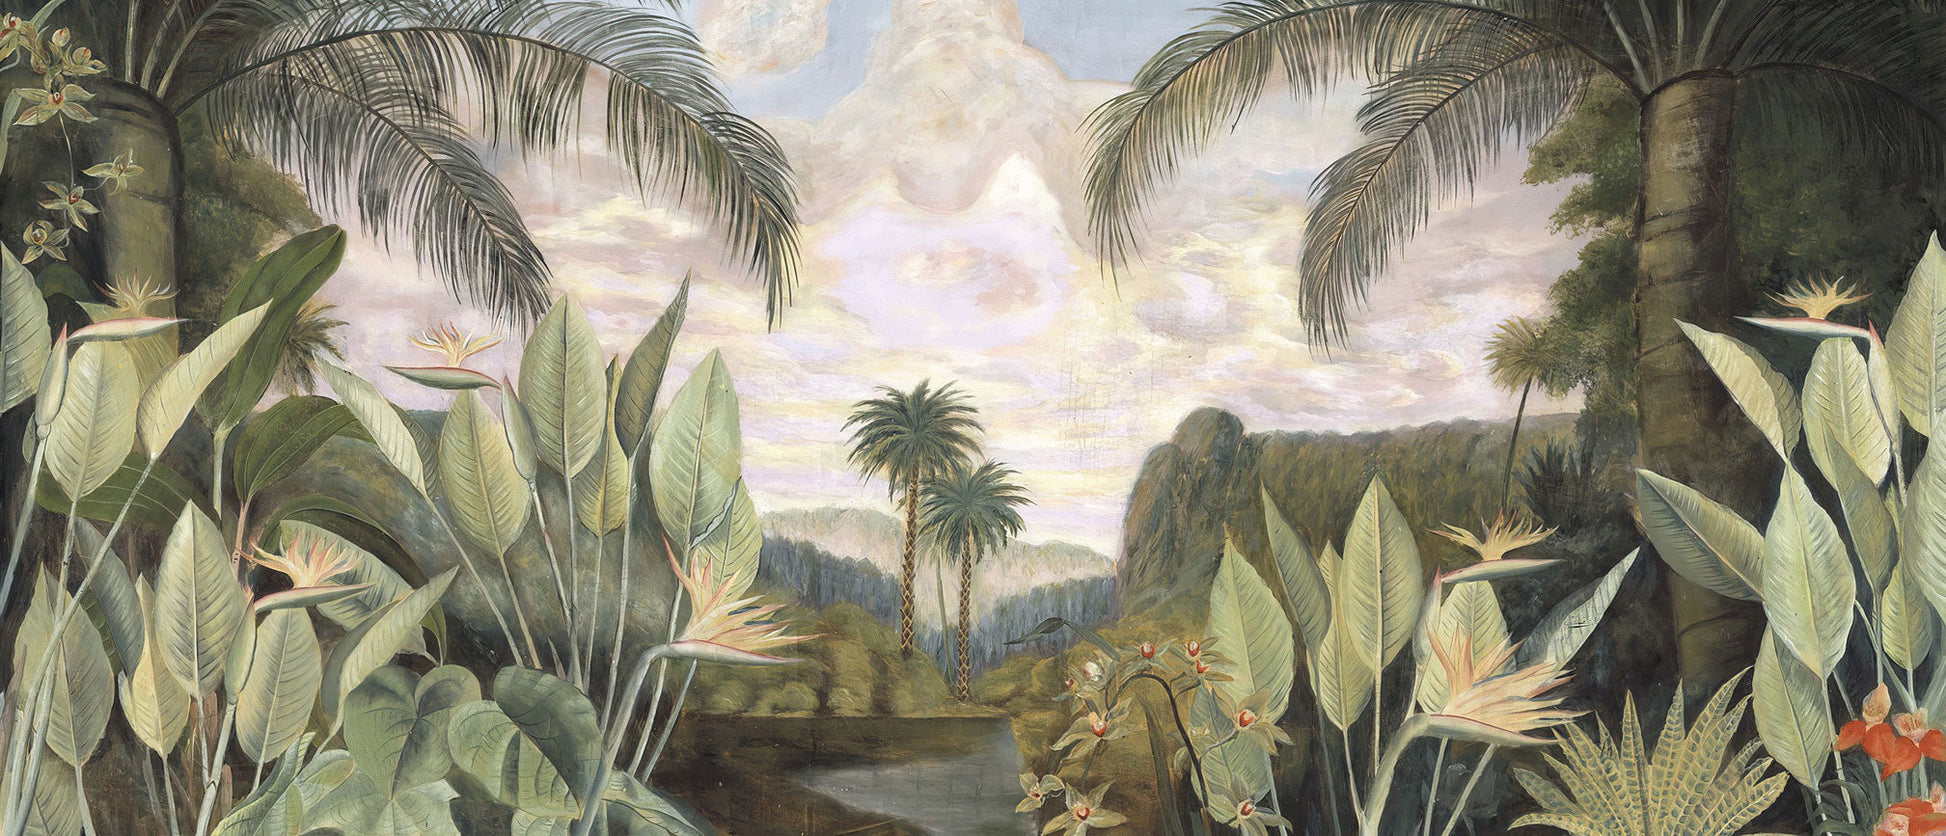 Home Decoration Featuring a Mural Wallpaper of a Tropical Forest